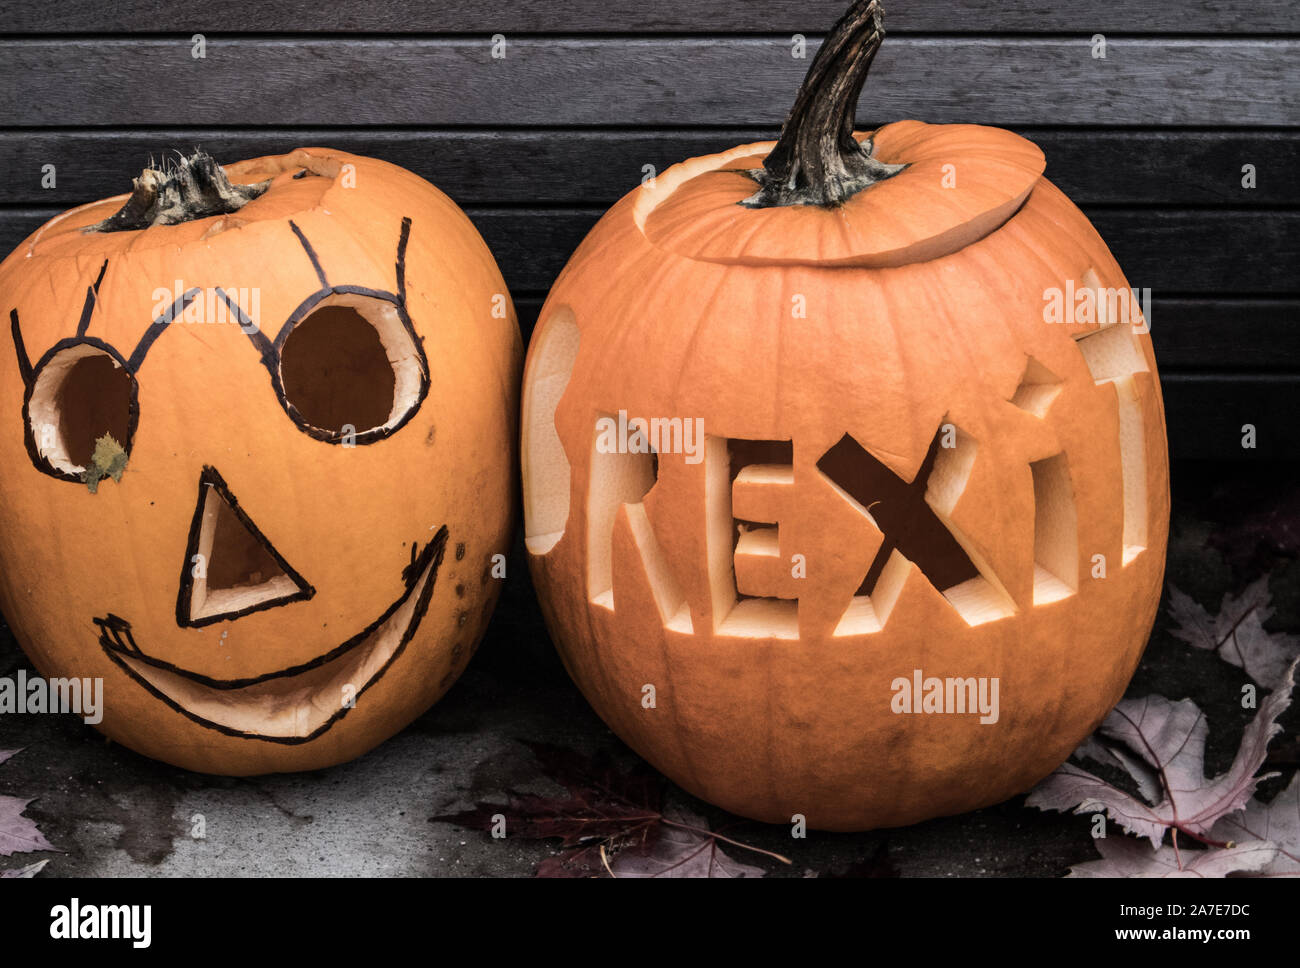 Two Halloween pumpkins, one represents Brexit. Stock Photo